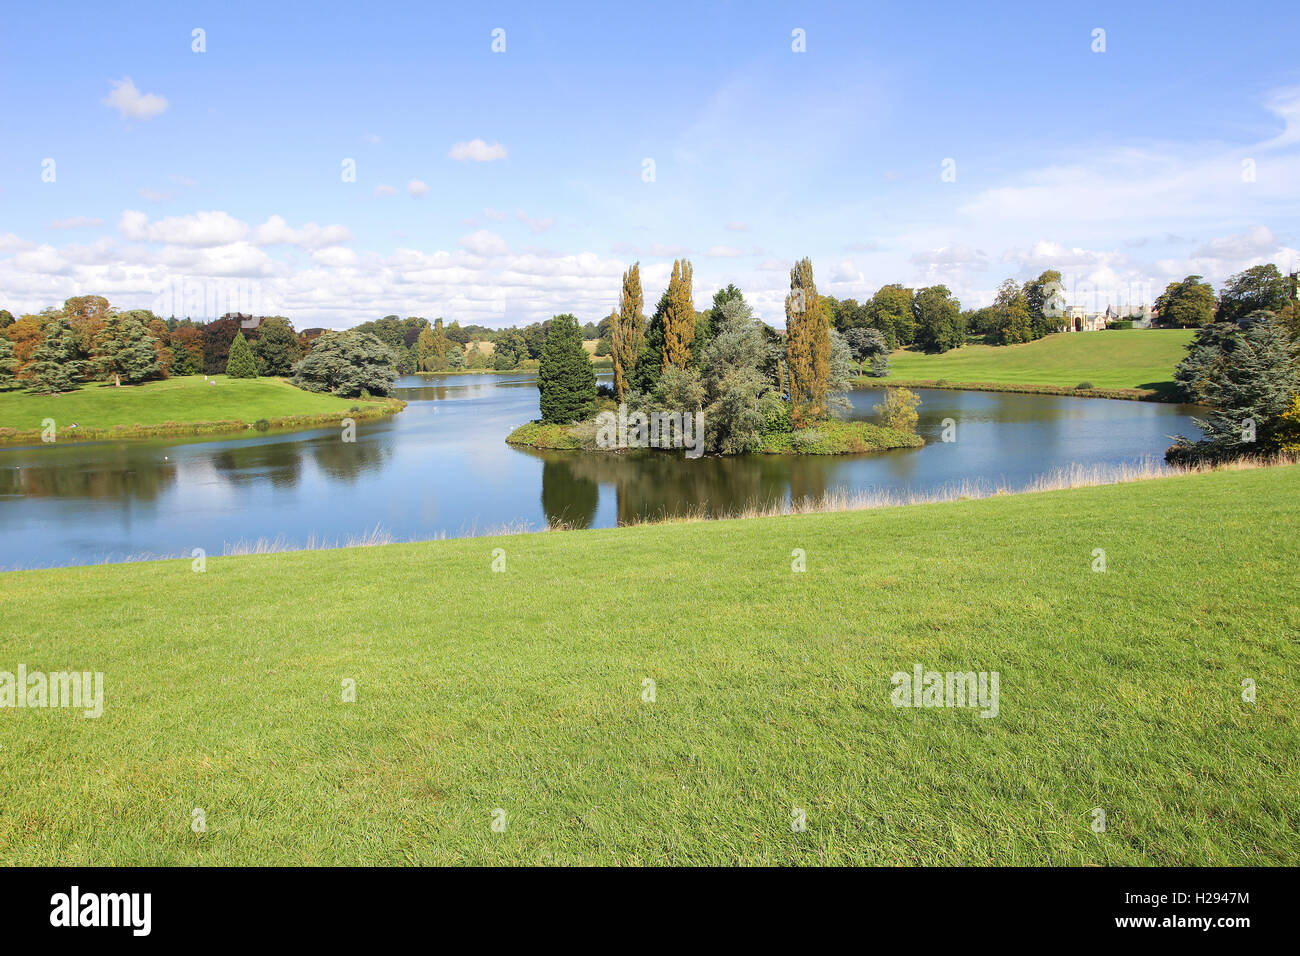 The Queen's Pool at Blenheim Palace Stock Photo